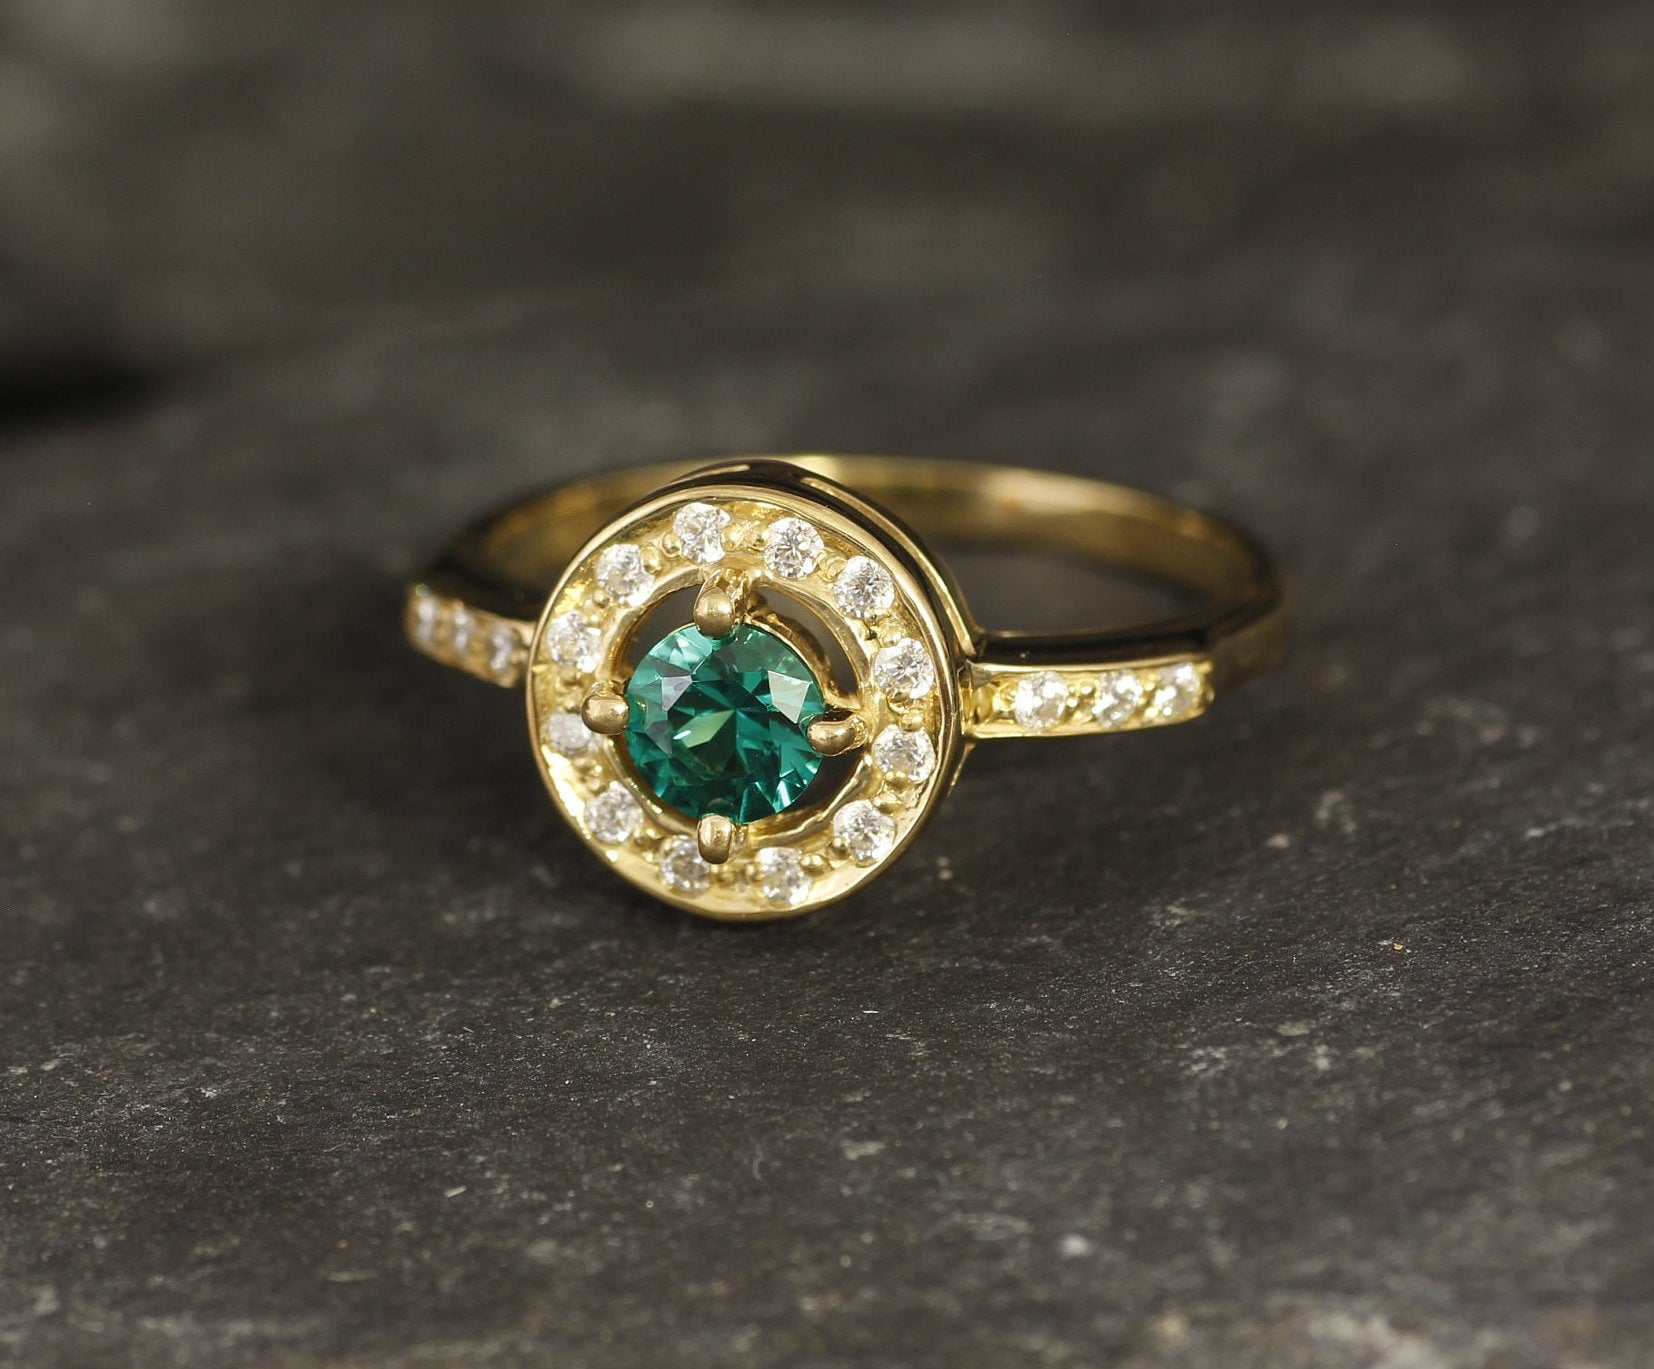 Gold Emerald Ring, Created Emerald, Gold Green Ring, Gold Vintage Ring, Green Diamond Ring, Gold Ring, Solitaire Ring, Silver Ring, Emerald